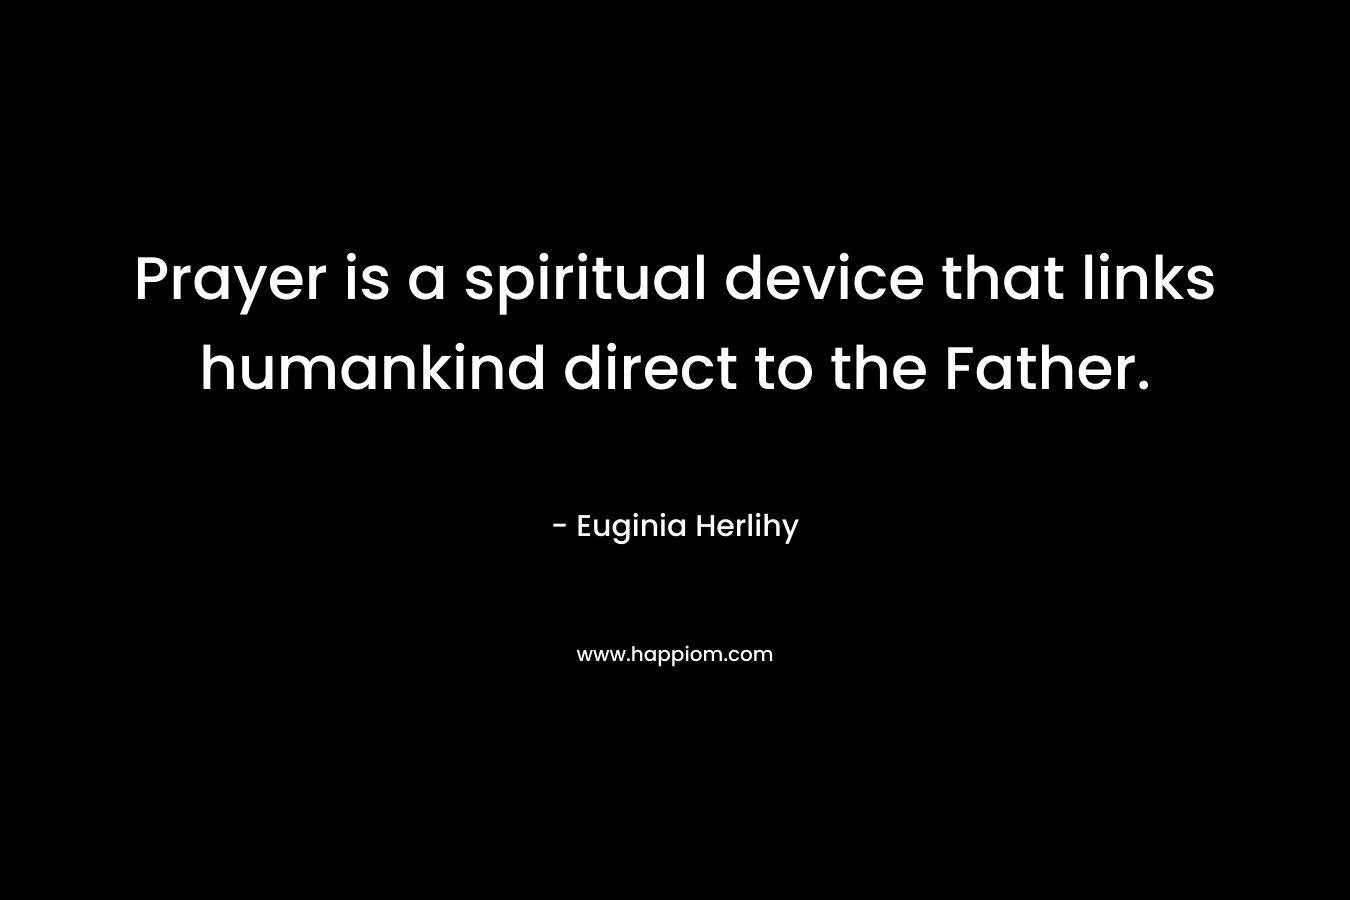 Prayer is a spiritual device that links humankind direct to the Father. – Euginia Herlihy